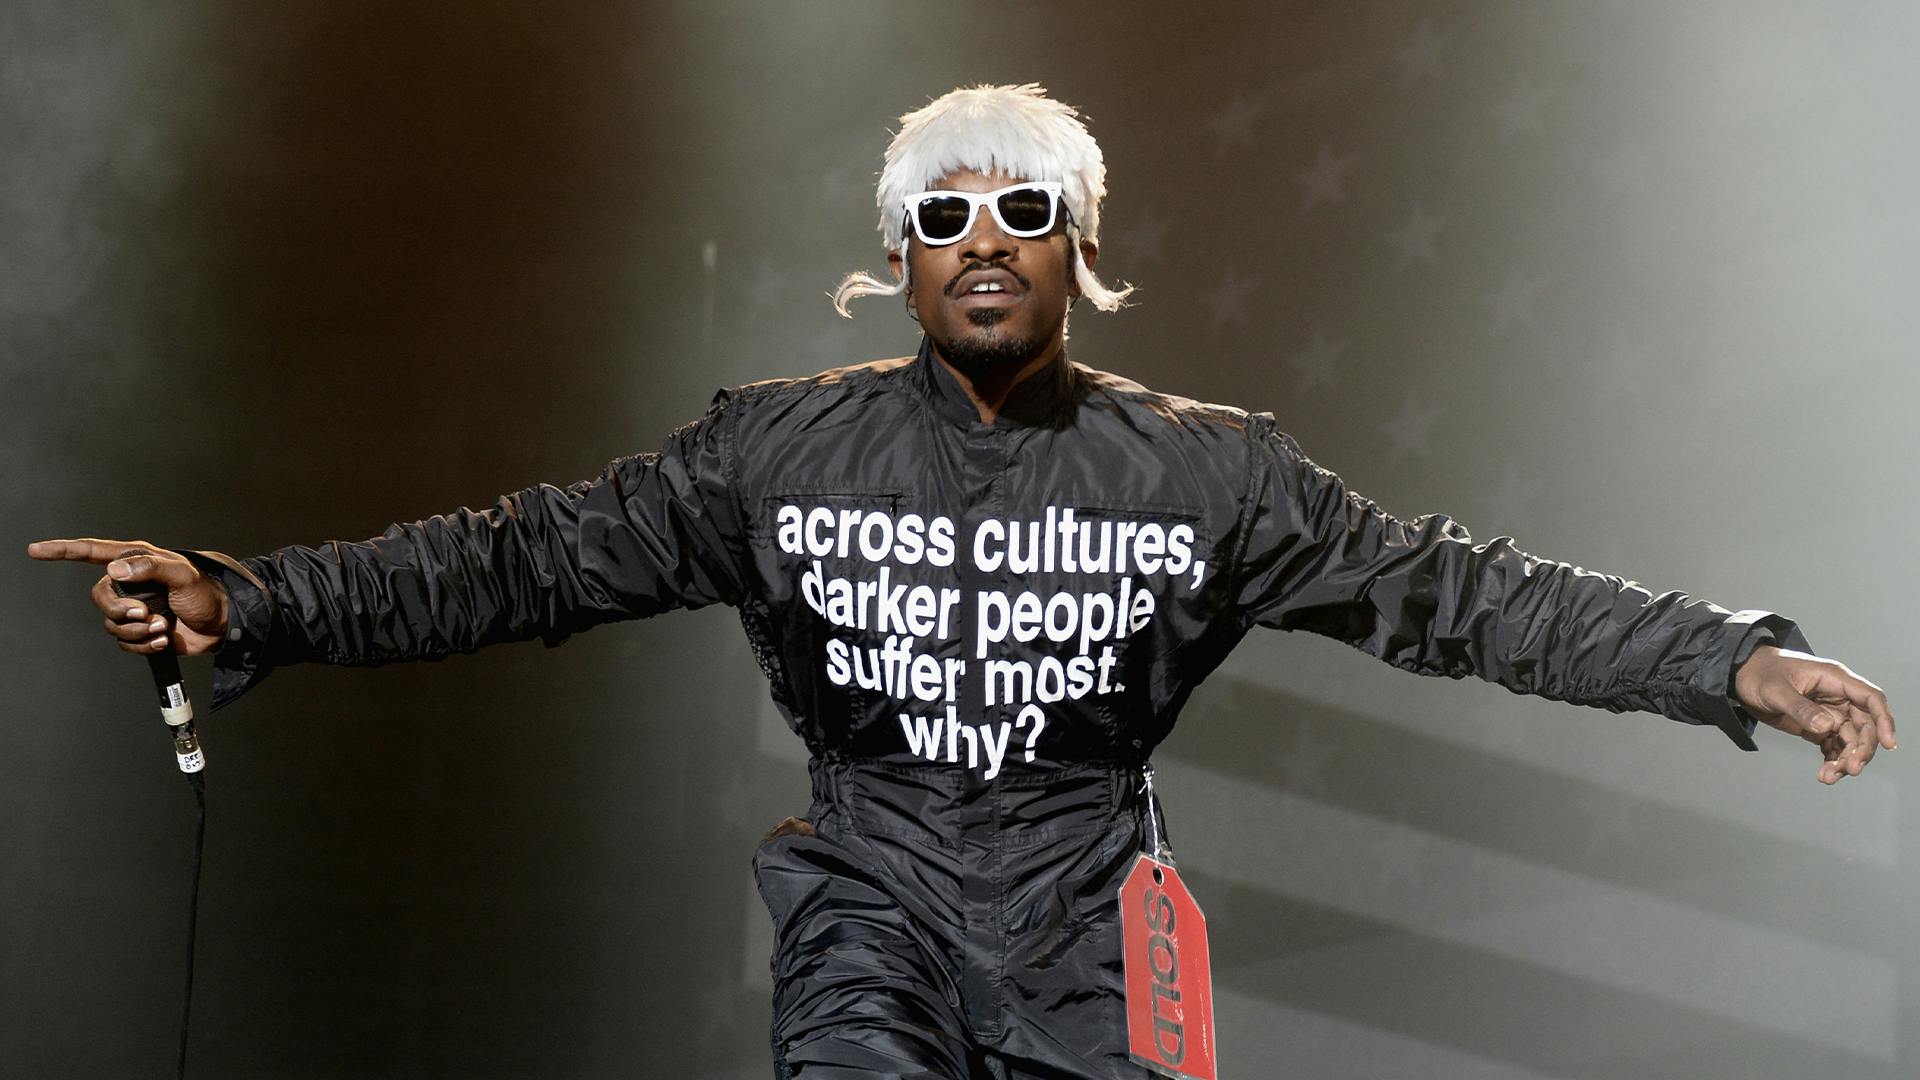 Andre 3000 of Outkast performs at Samsung Galaxy stage during 2014 Lollapalooza Day Two at Grant Park on August 2, 2014 in Chicago, Illinois.